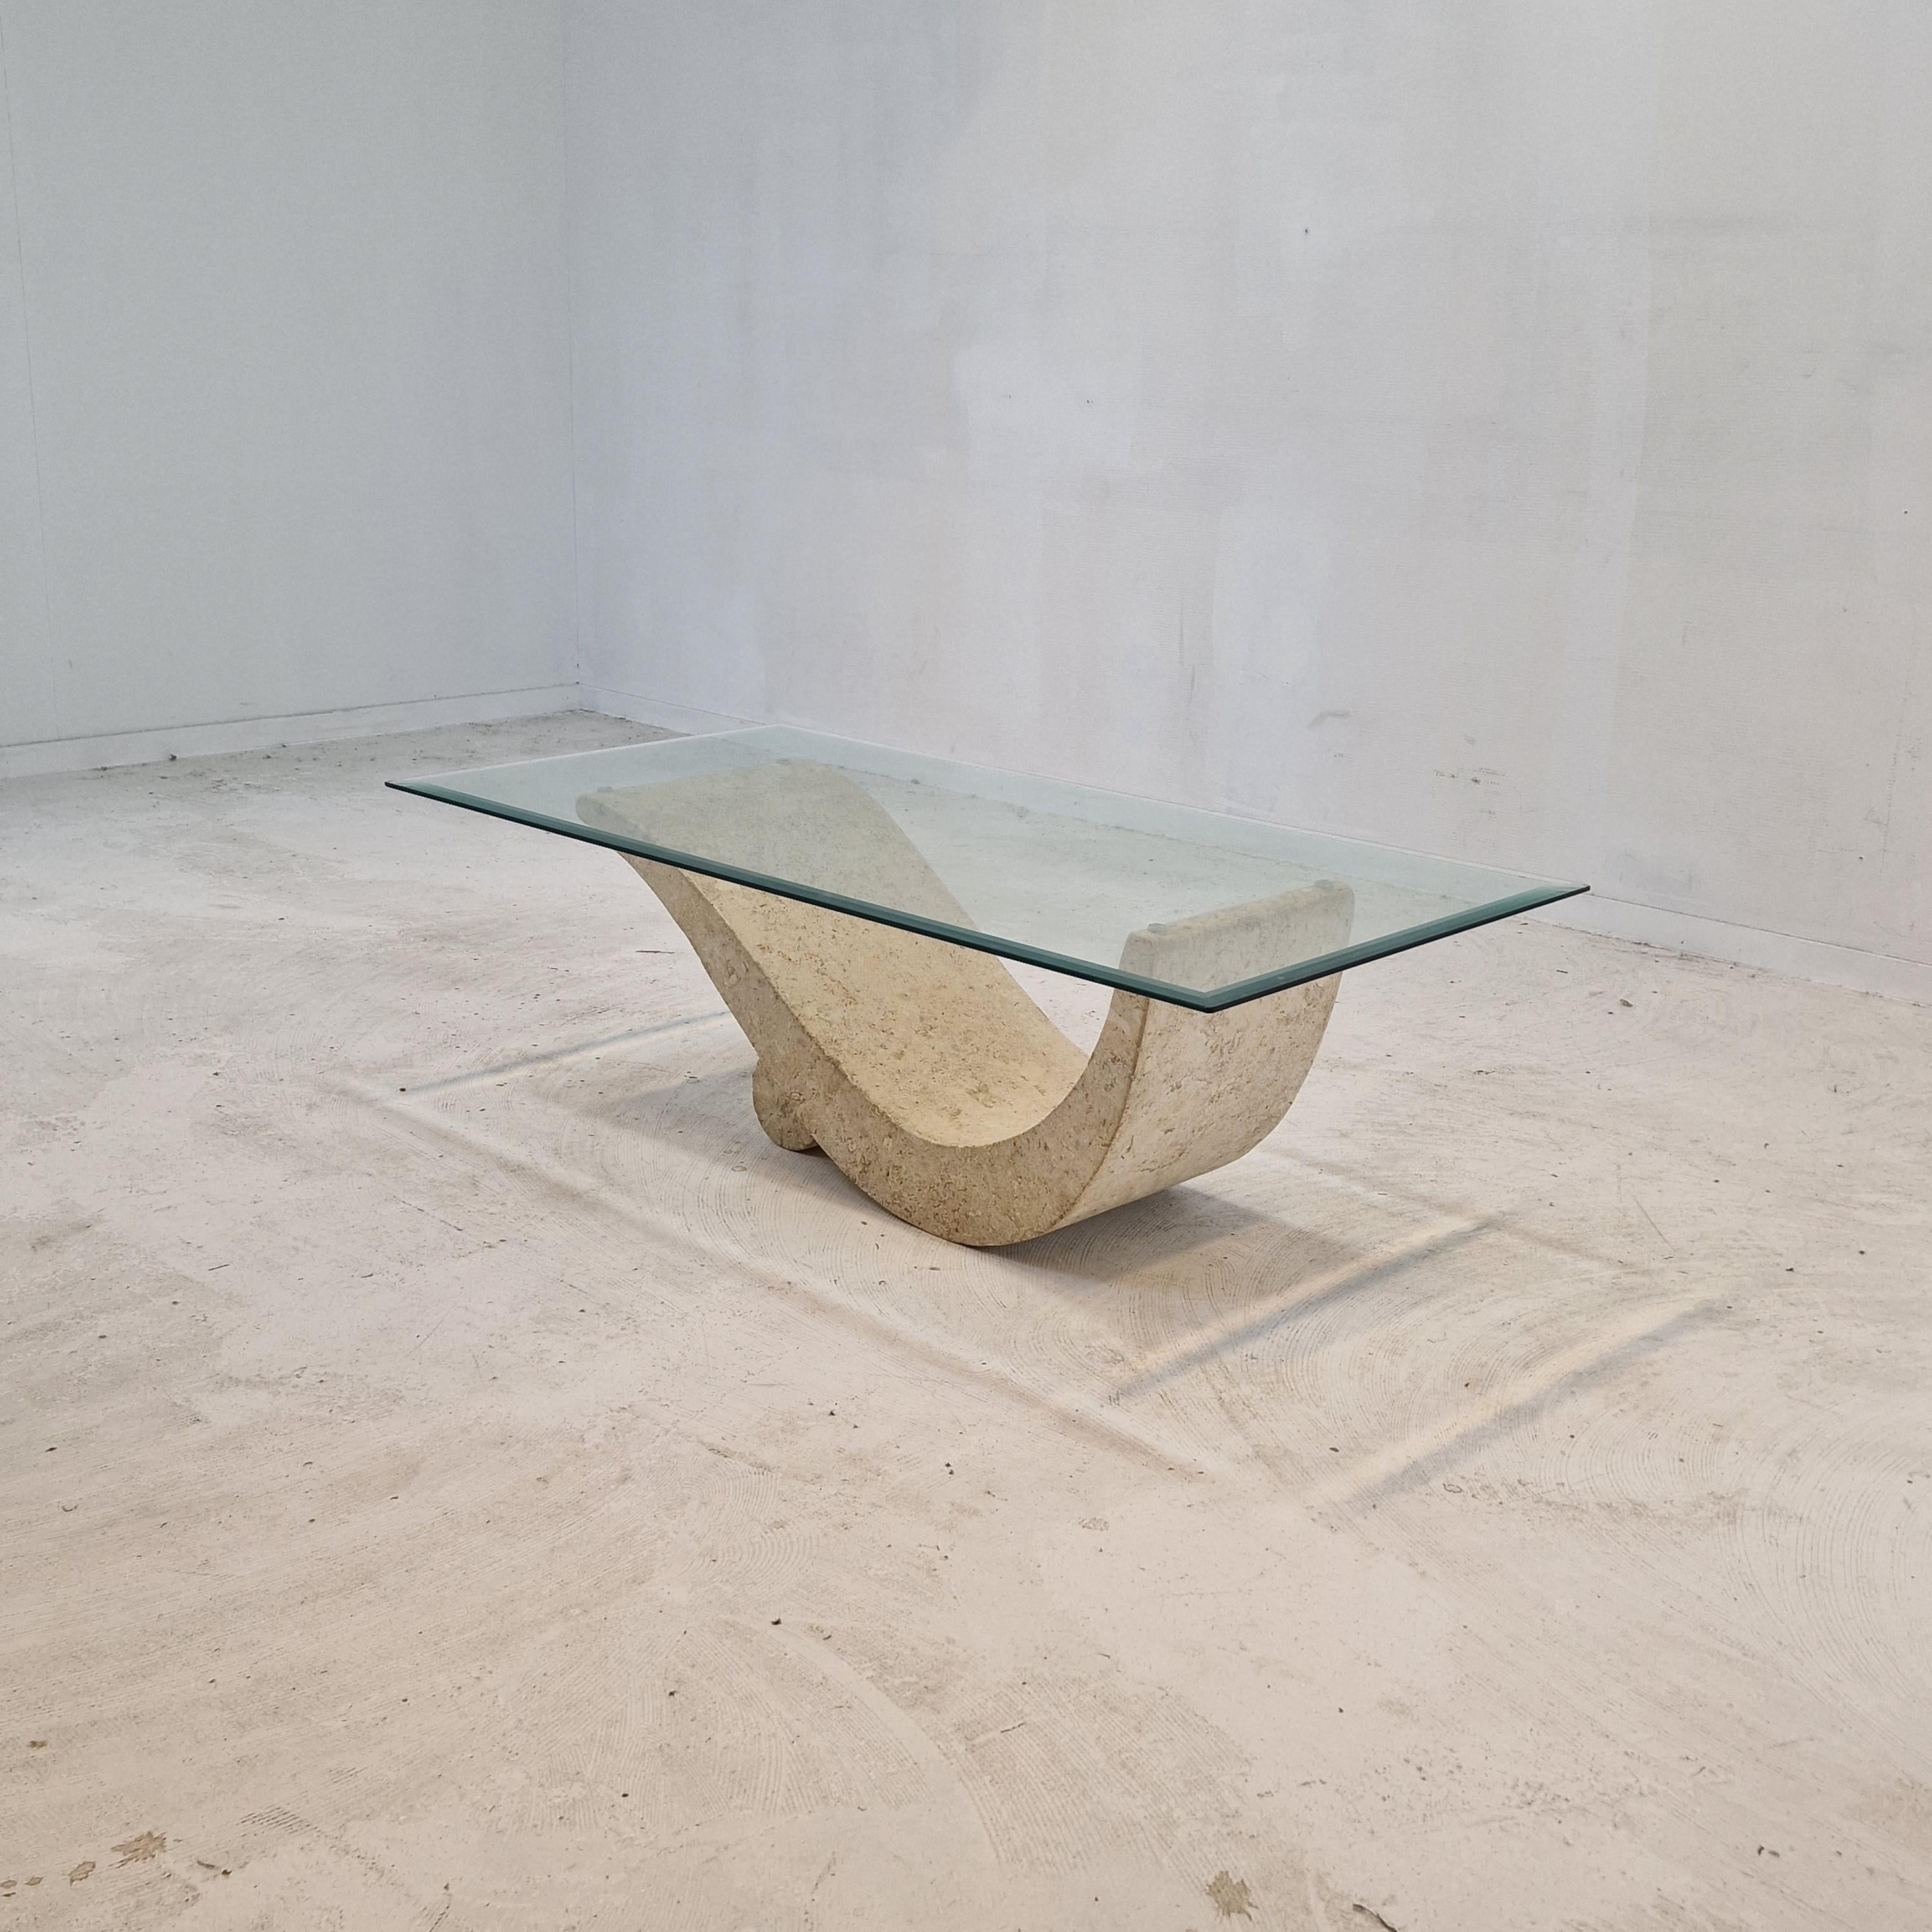 Hand-Crafted Mactan Stone Coffee or Fossil Stone Table, 1990s